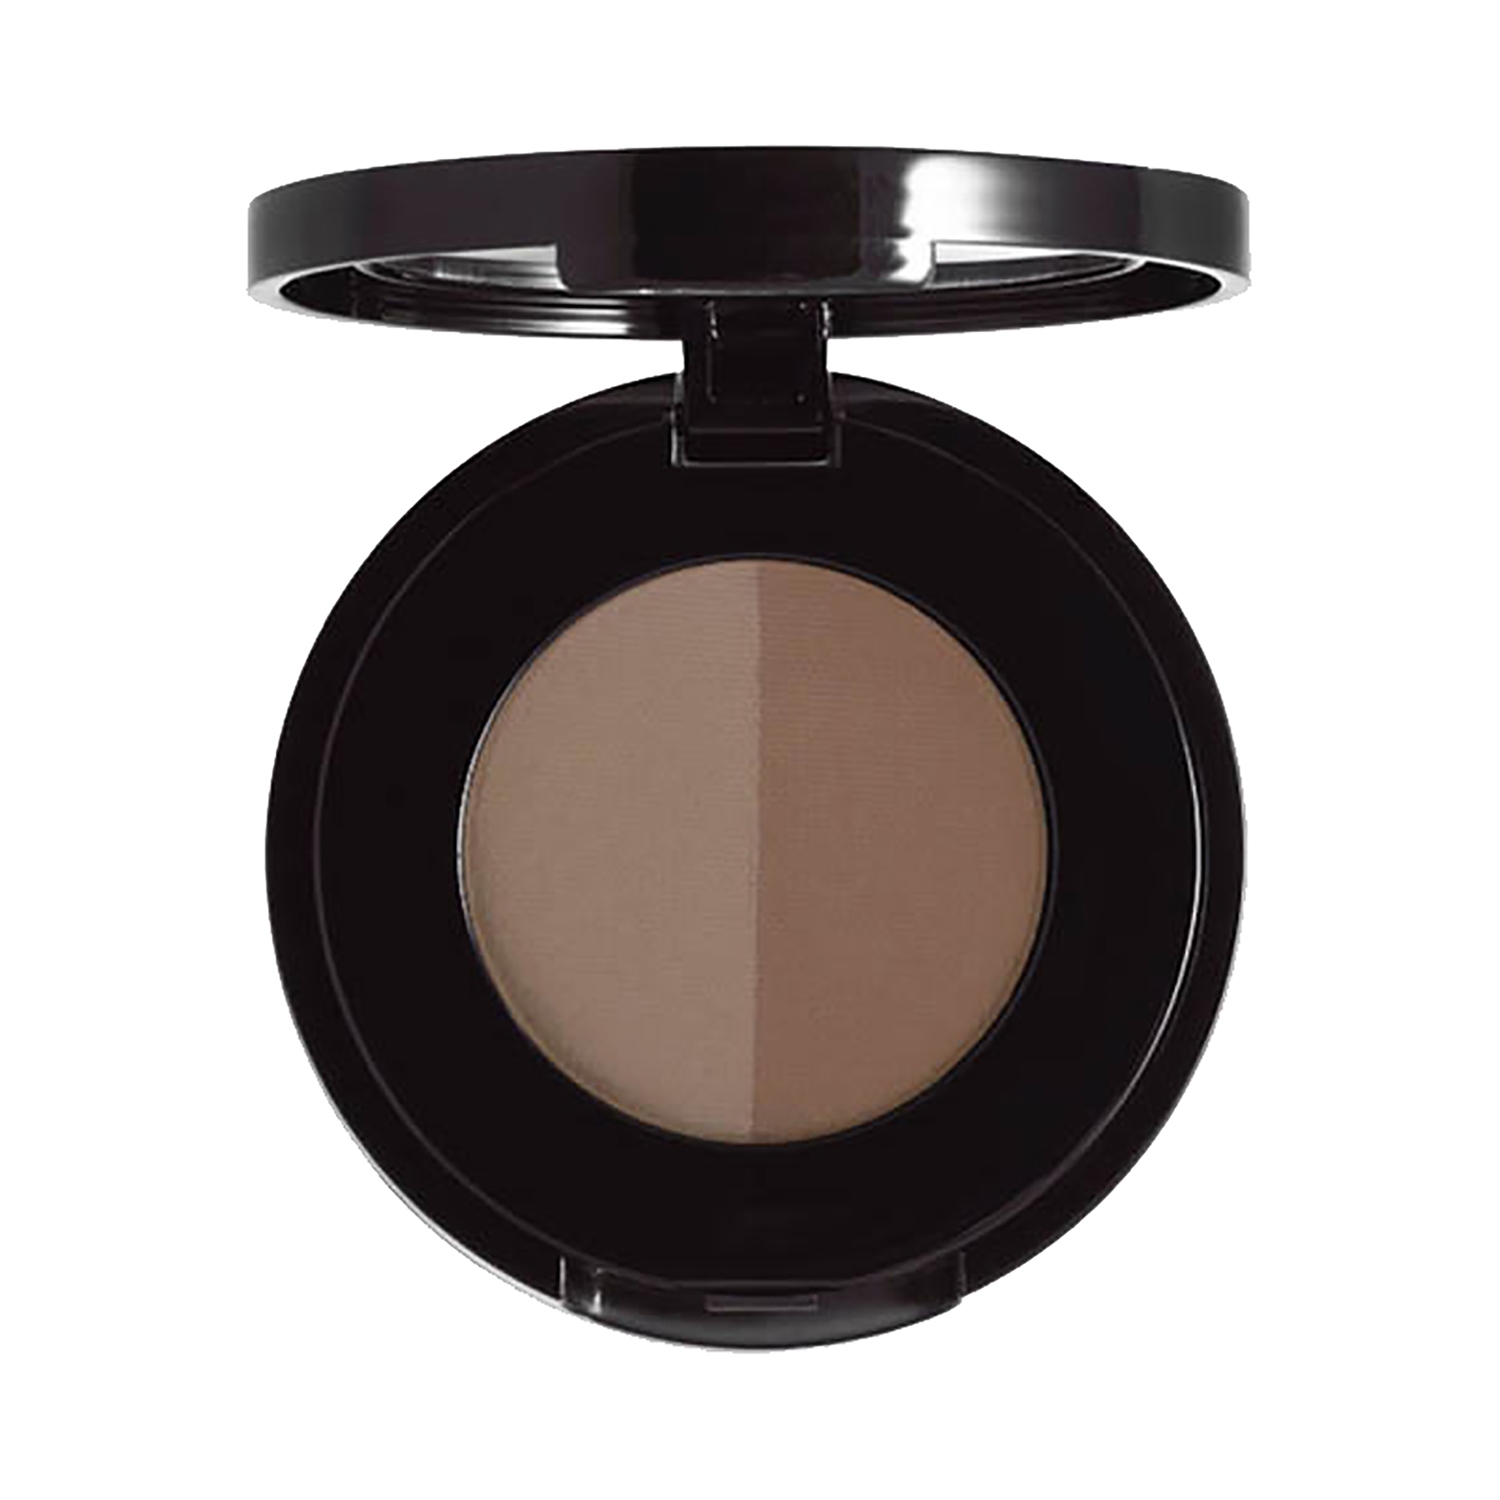 Anastasia Beverly Hills | Anastasia Beverly Hills Brow Powder Duo - Soft Brown (1.6g)